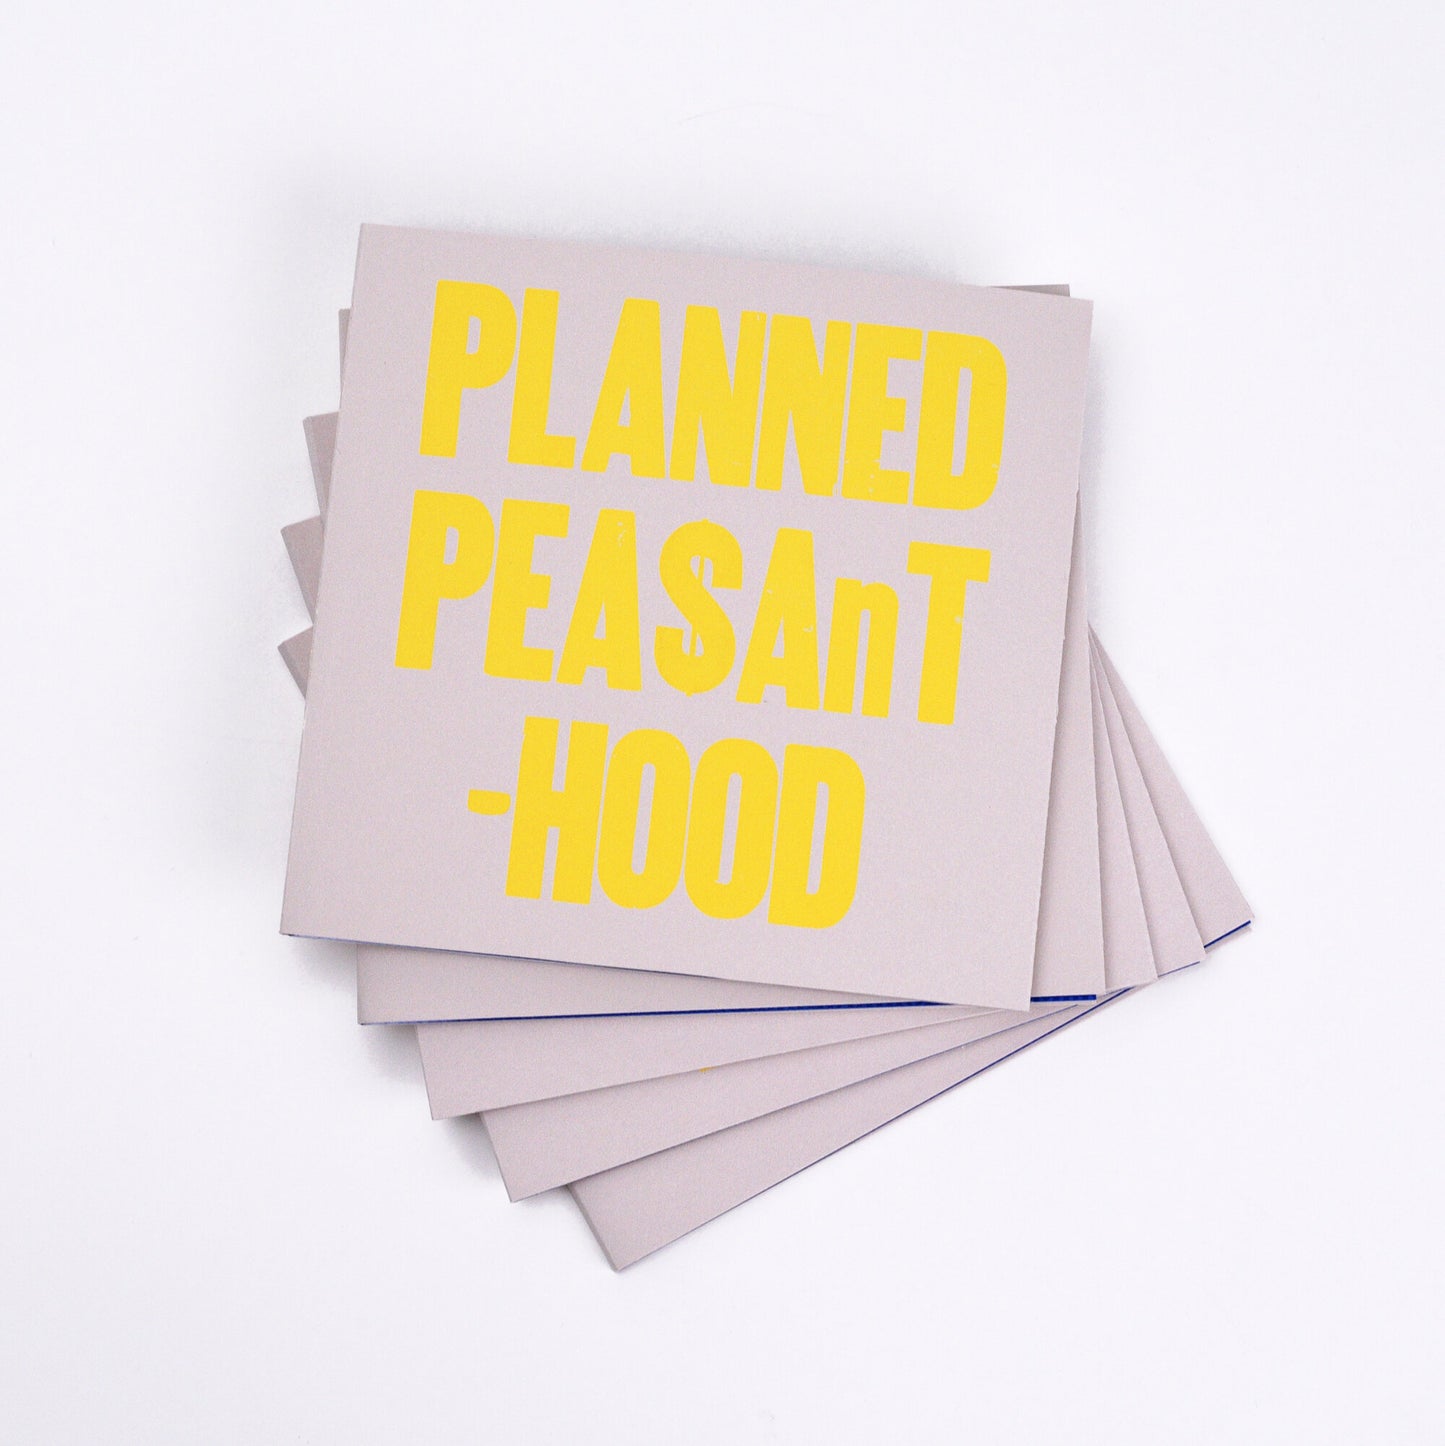 Holly Ward: Planned Peasanthood